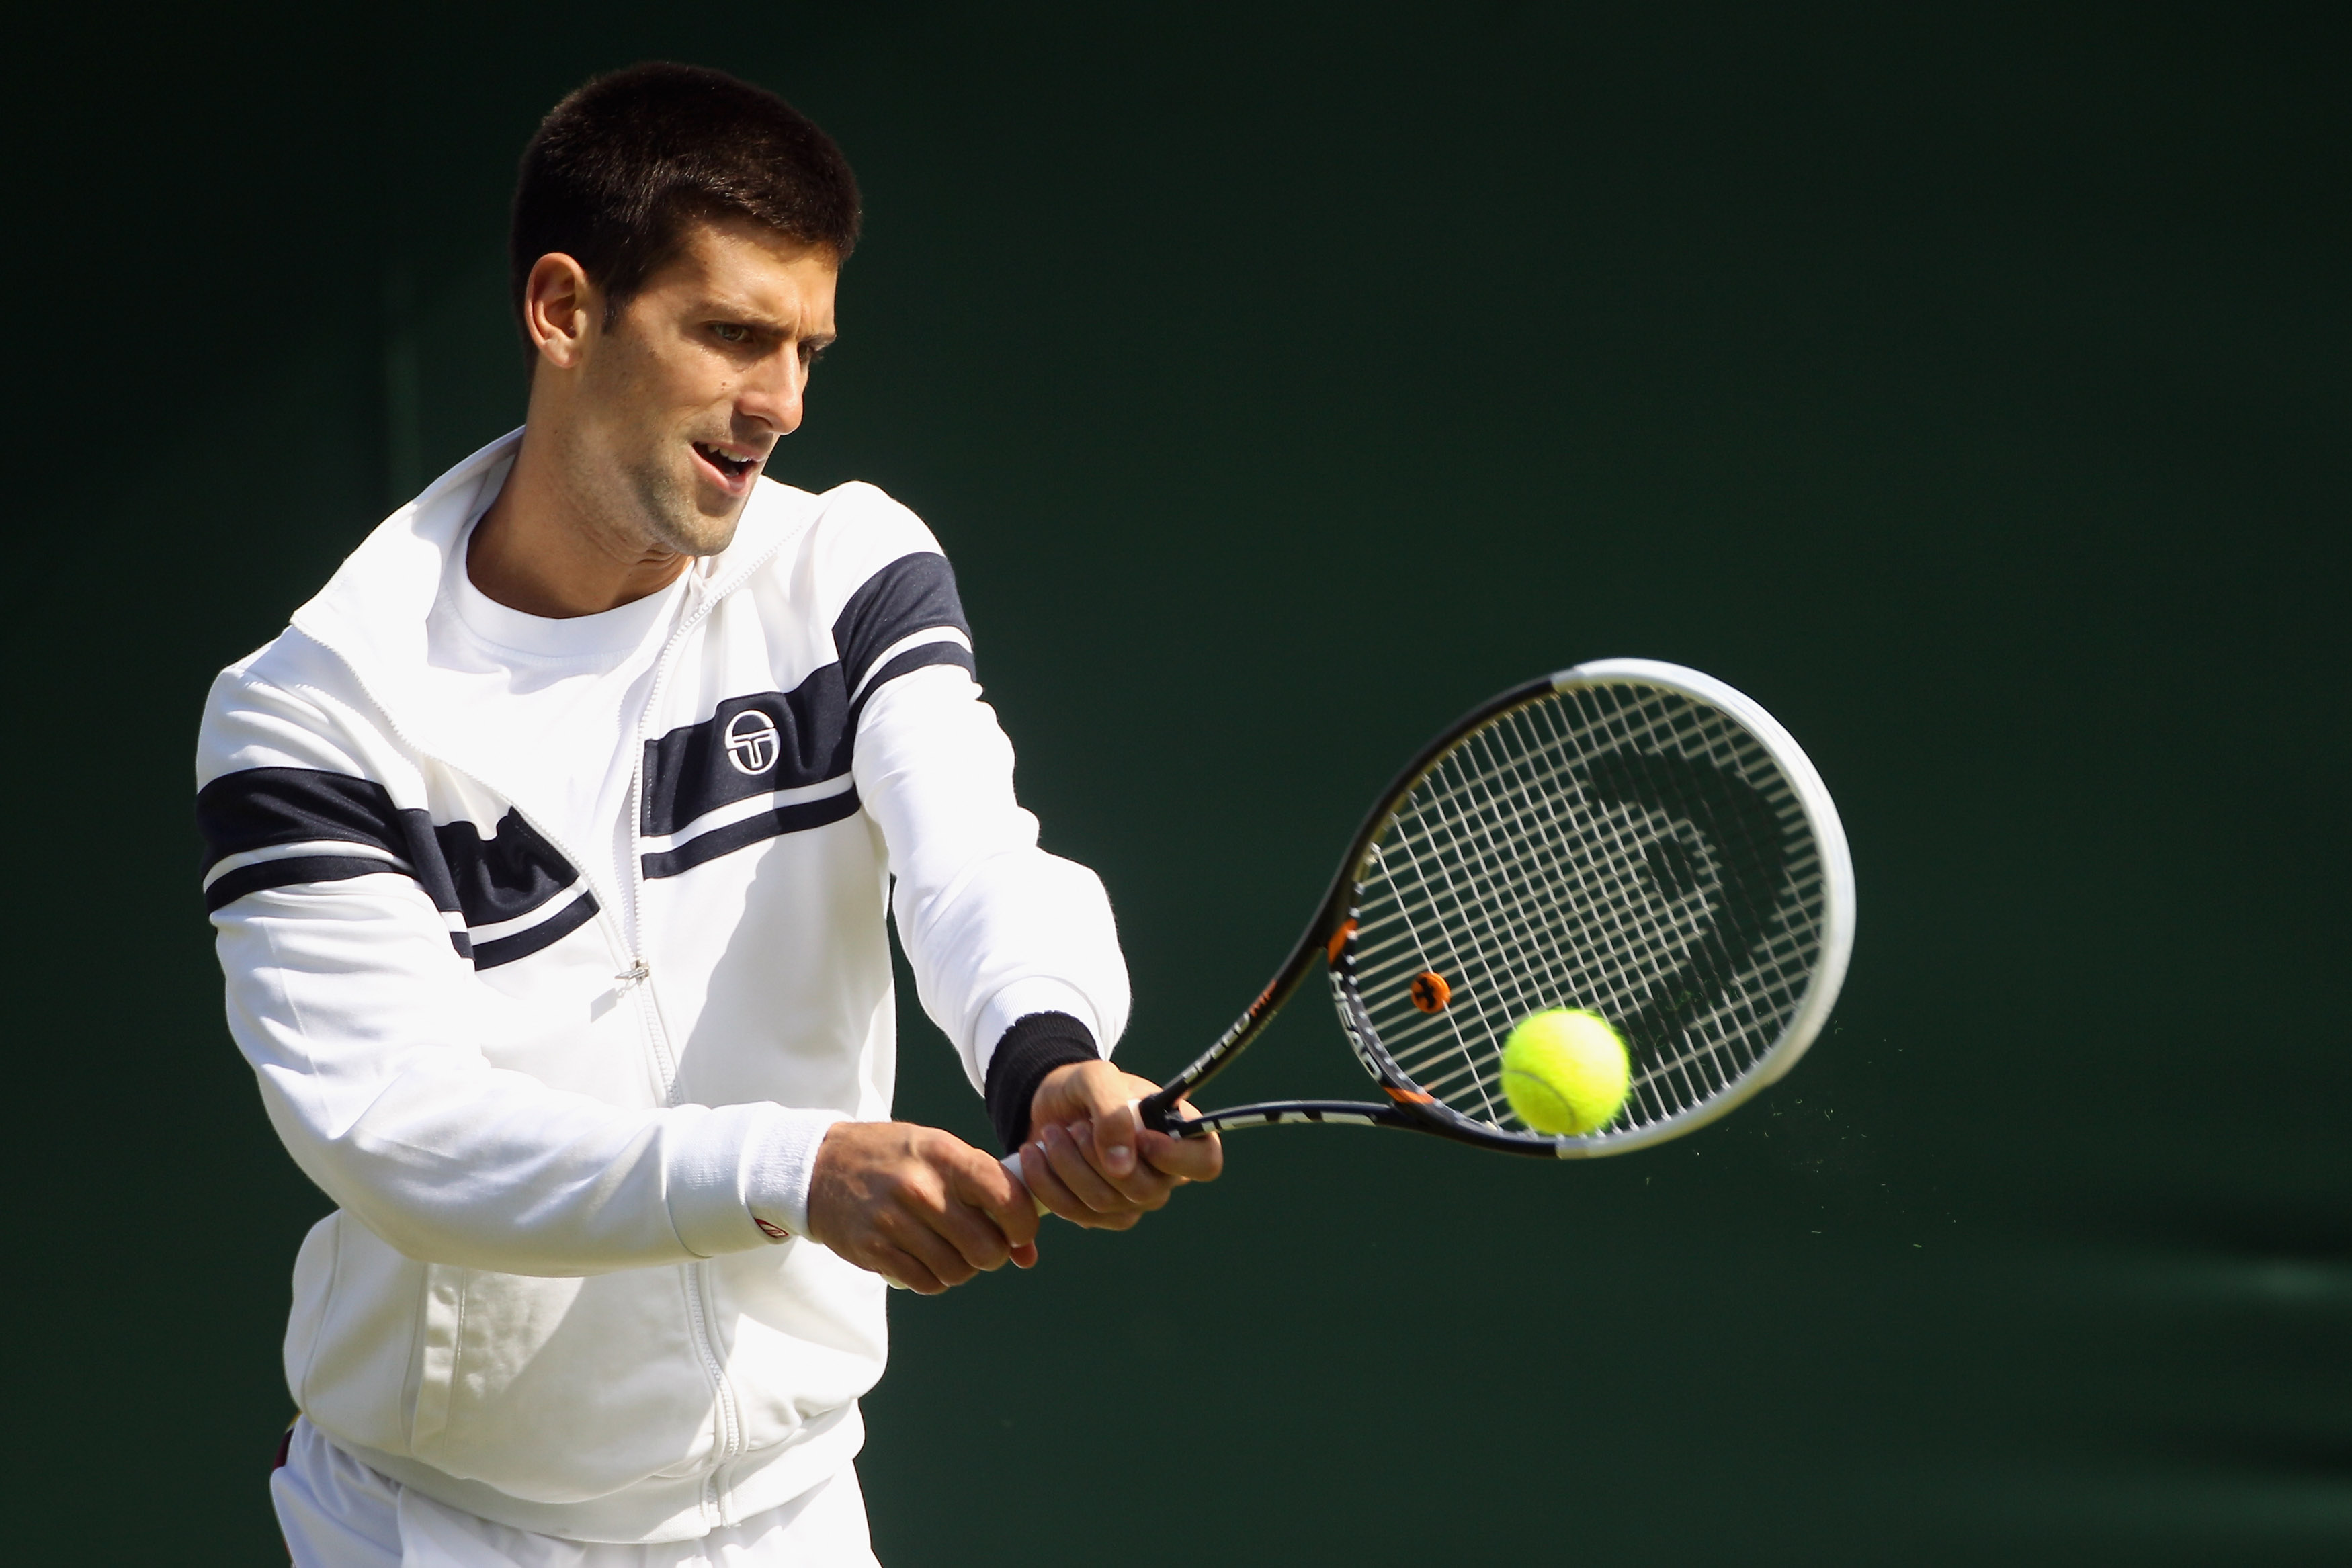 WIMBLEDON, ENGLAND - JUNE 18:  Serbian tennis player Novak Djokovic trains on court 6 at the All England Lawn Tennis and Croquet Club ahead of the Wimbledon Lawn Tennis Championships on June 18, 2011 in London, England. The Championships which are celebra